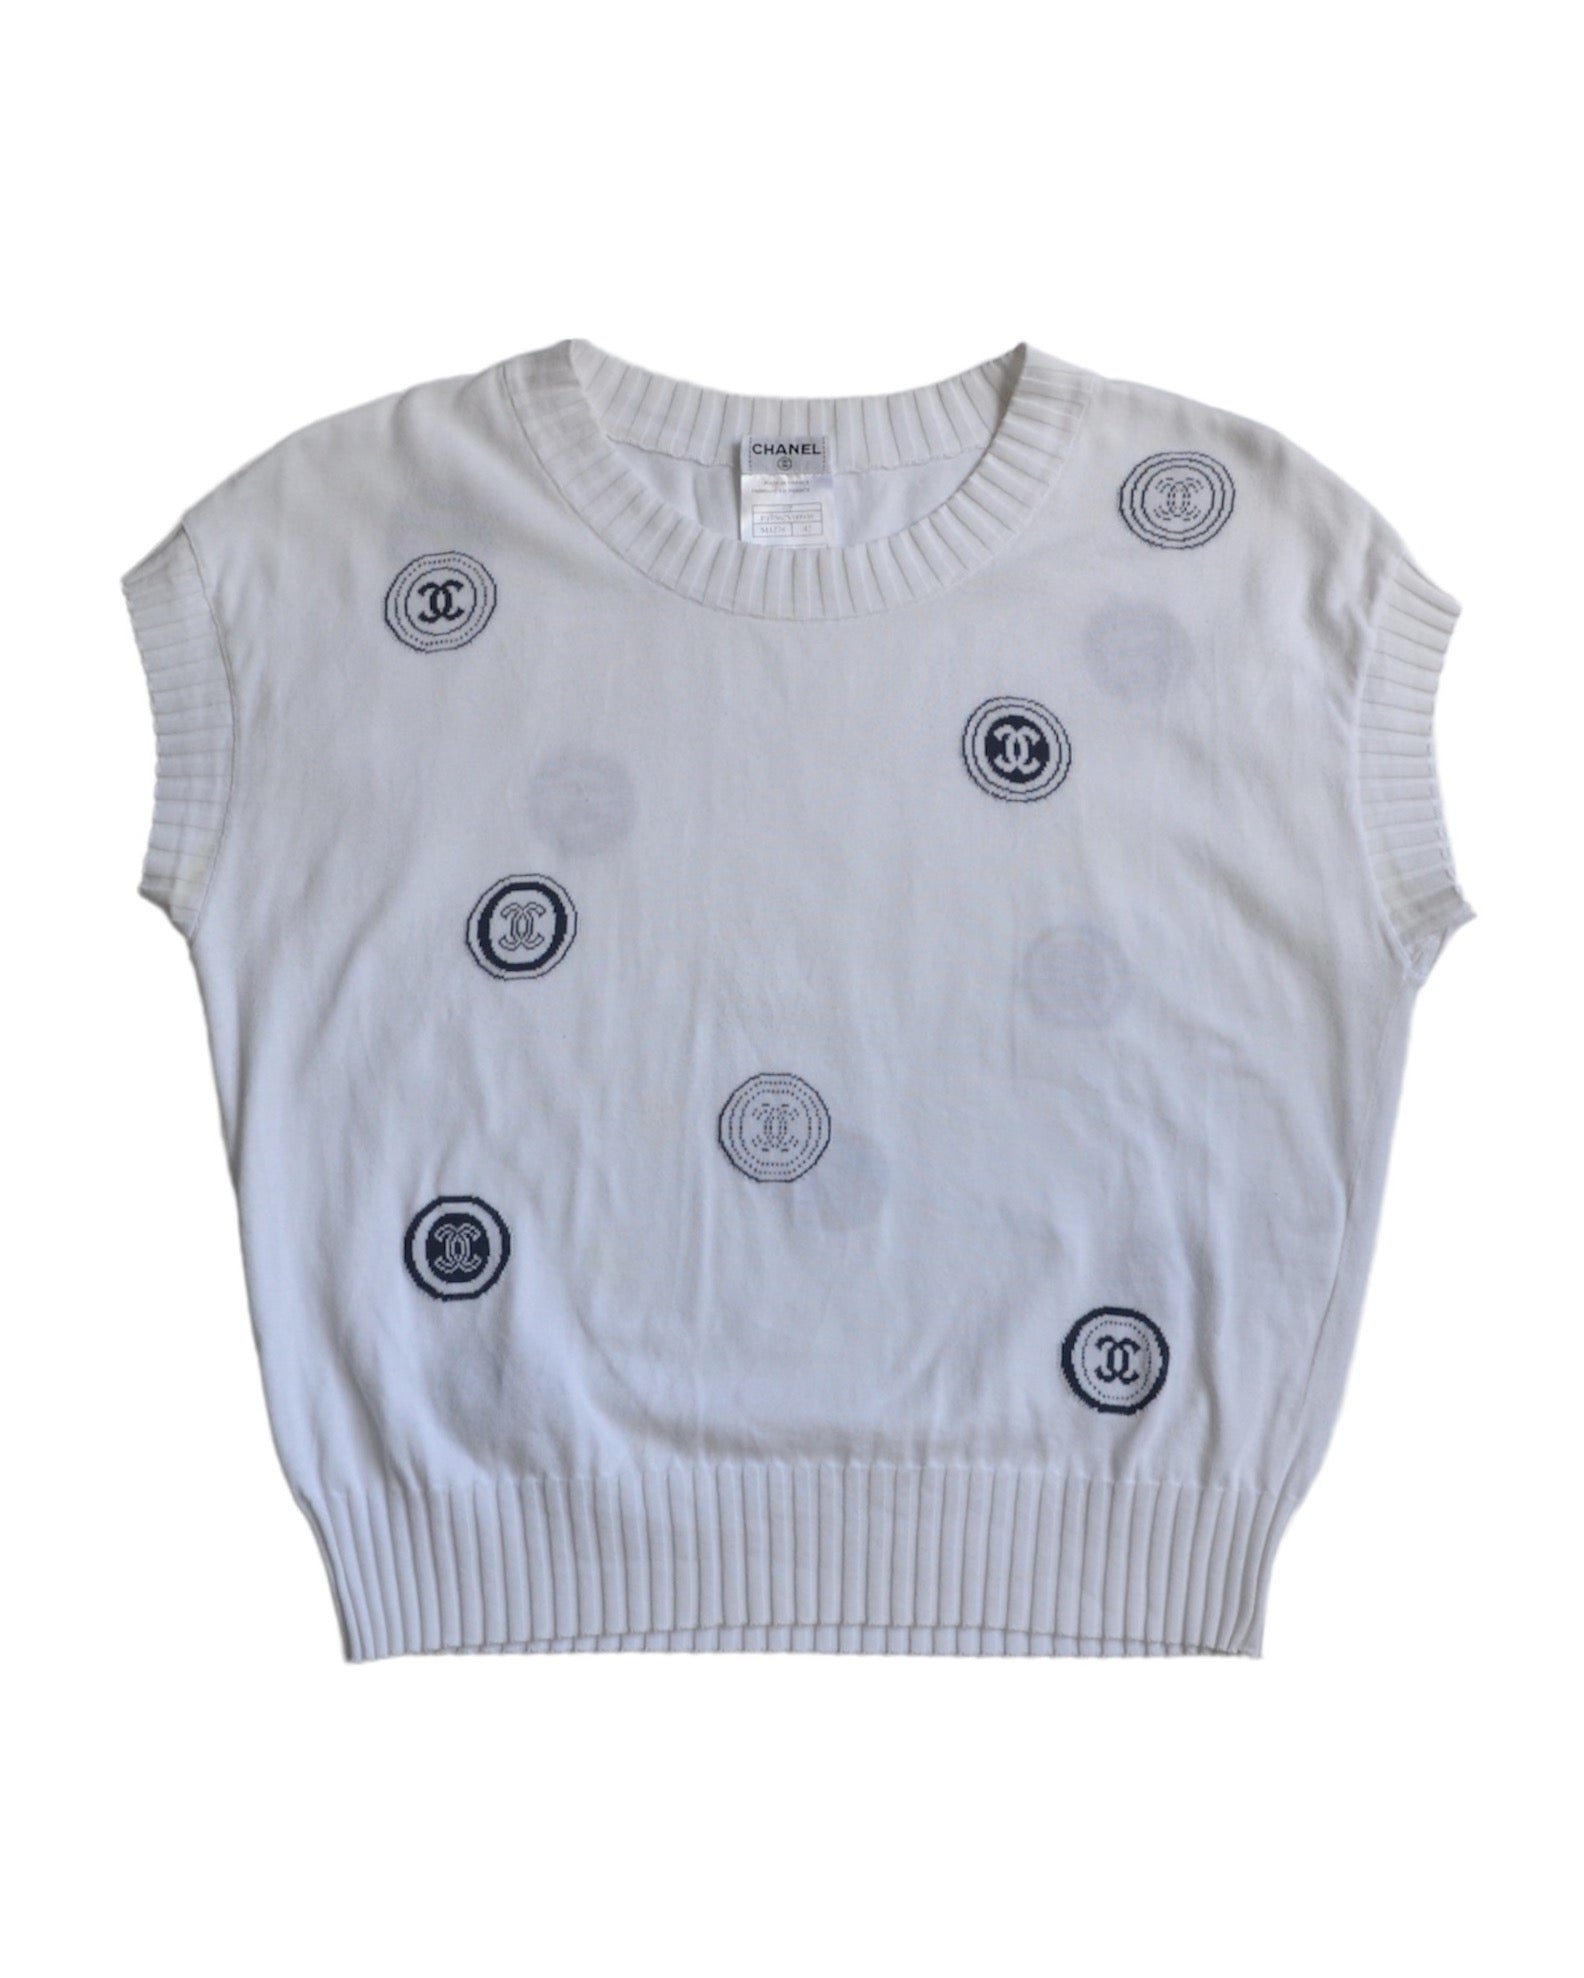 CHANEL Sweater shirt zipper - clothing & accessories - by owner - apparel  sale - craigslist